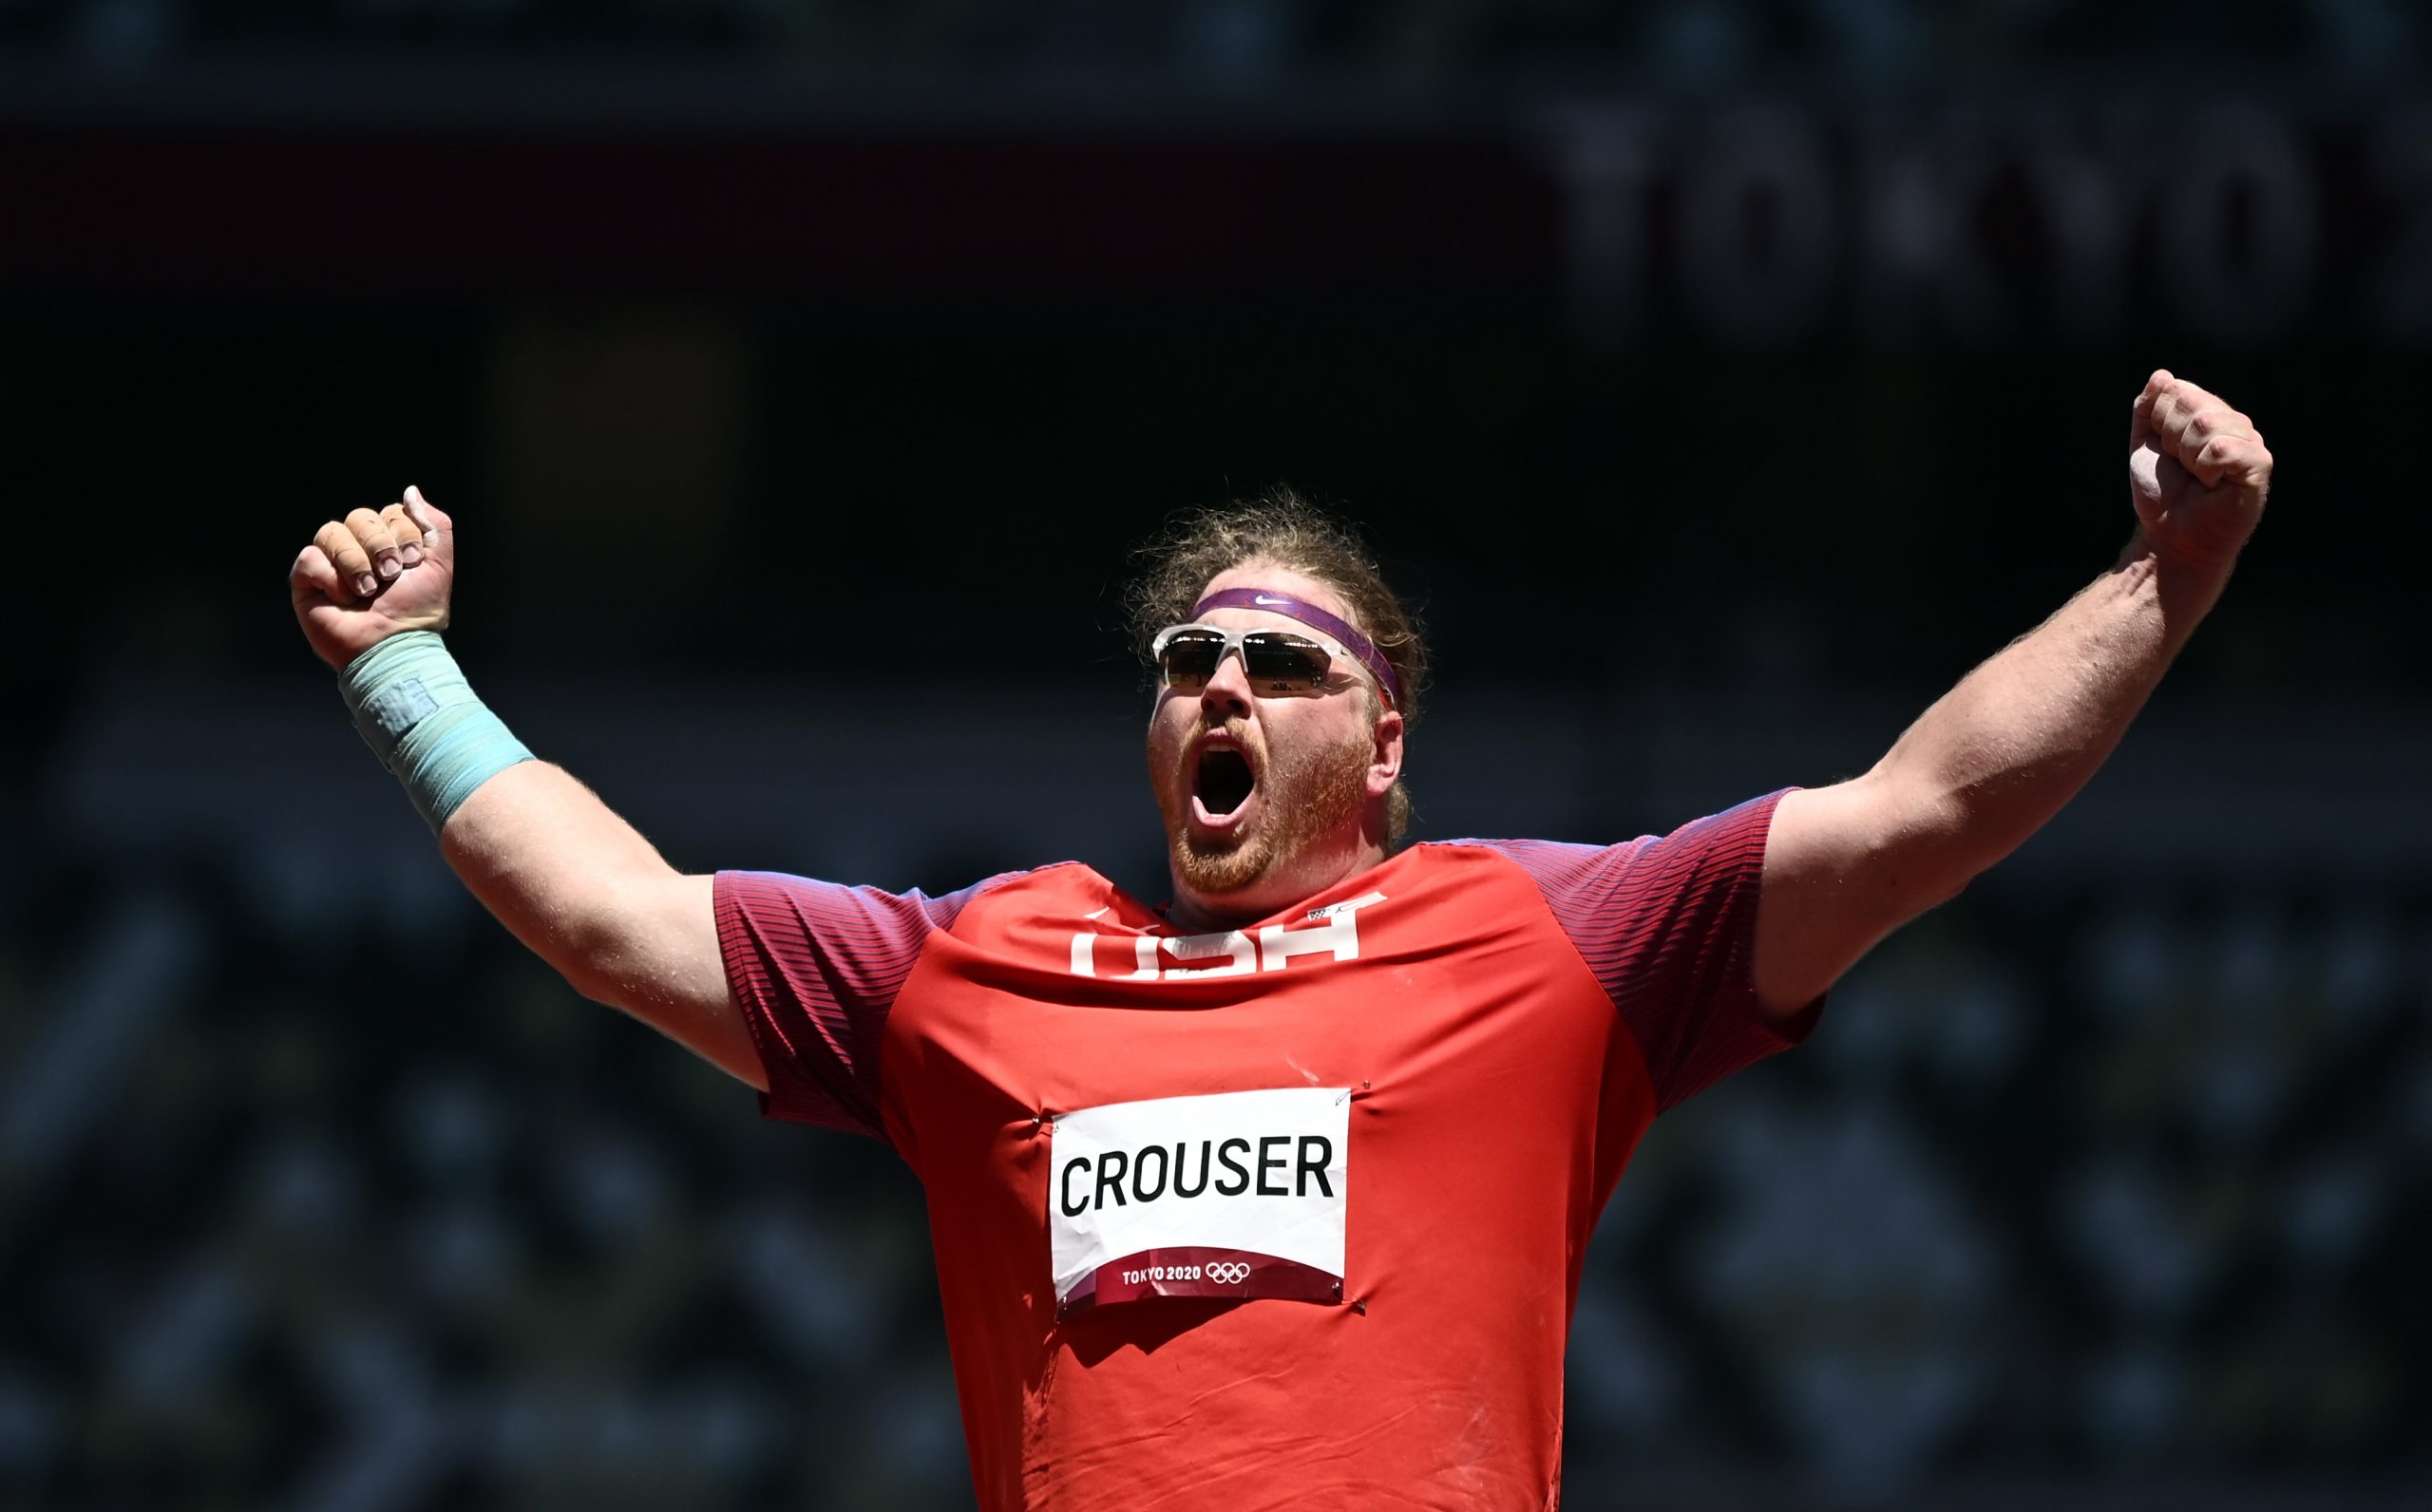 epa09396478 Ryan Crouser of USA celebrates after winning gold in the Men's Shot Put Final during the Athletics events of the Tokyo 2020 Olymp?ic Games at the Olympic Stadium in Tokyo, Japan, 05 August 2021.  EPA/CHRISTIAN BRUNA